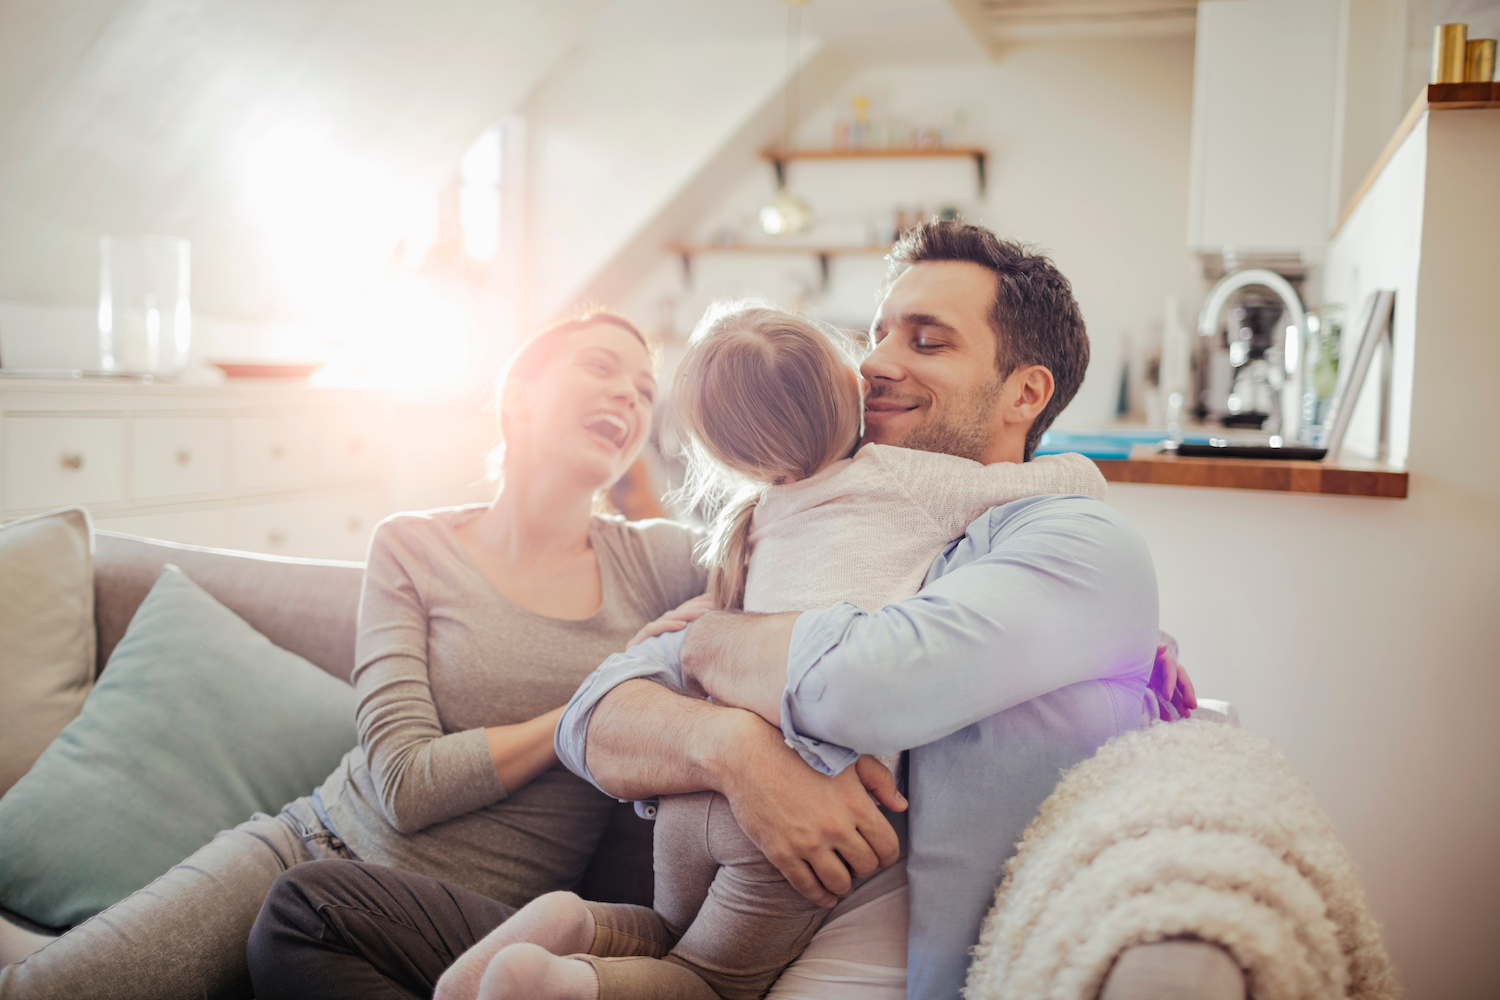 Mom and Dad smile as they embrace their young daughter on the couch in their family room